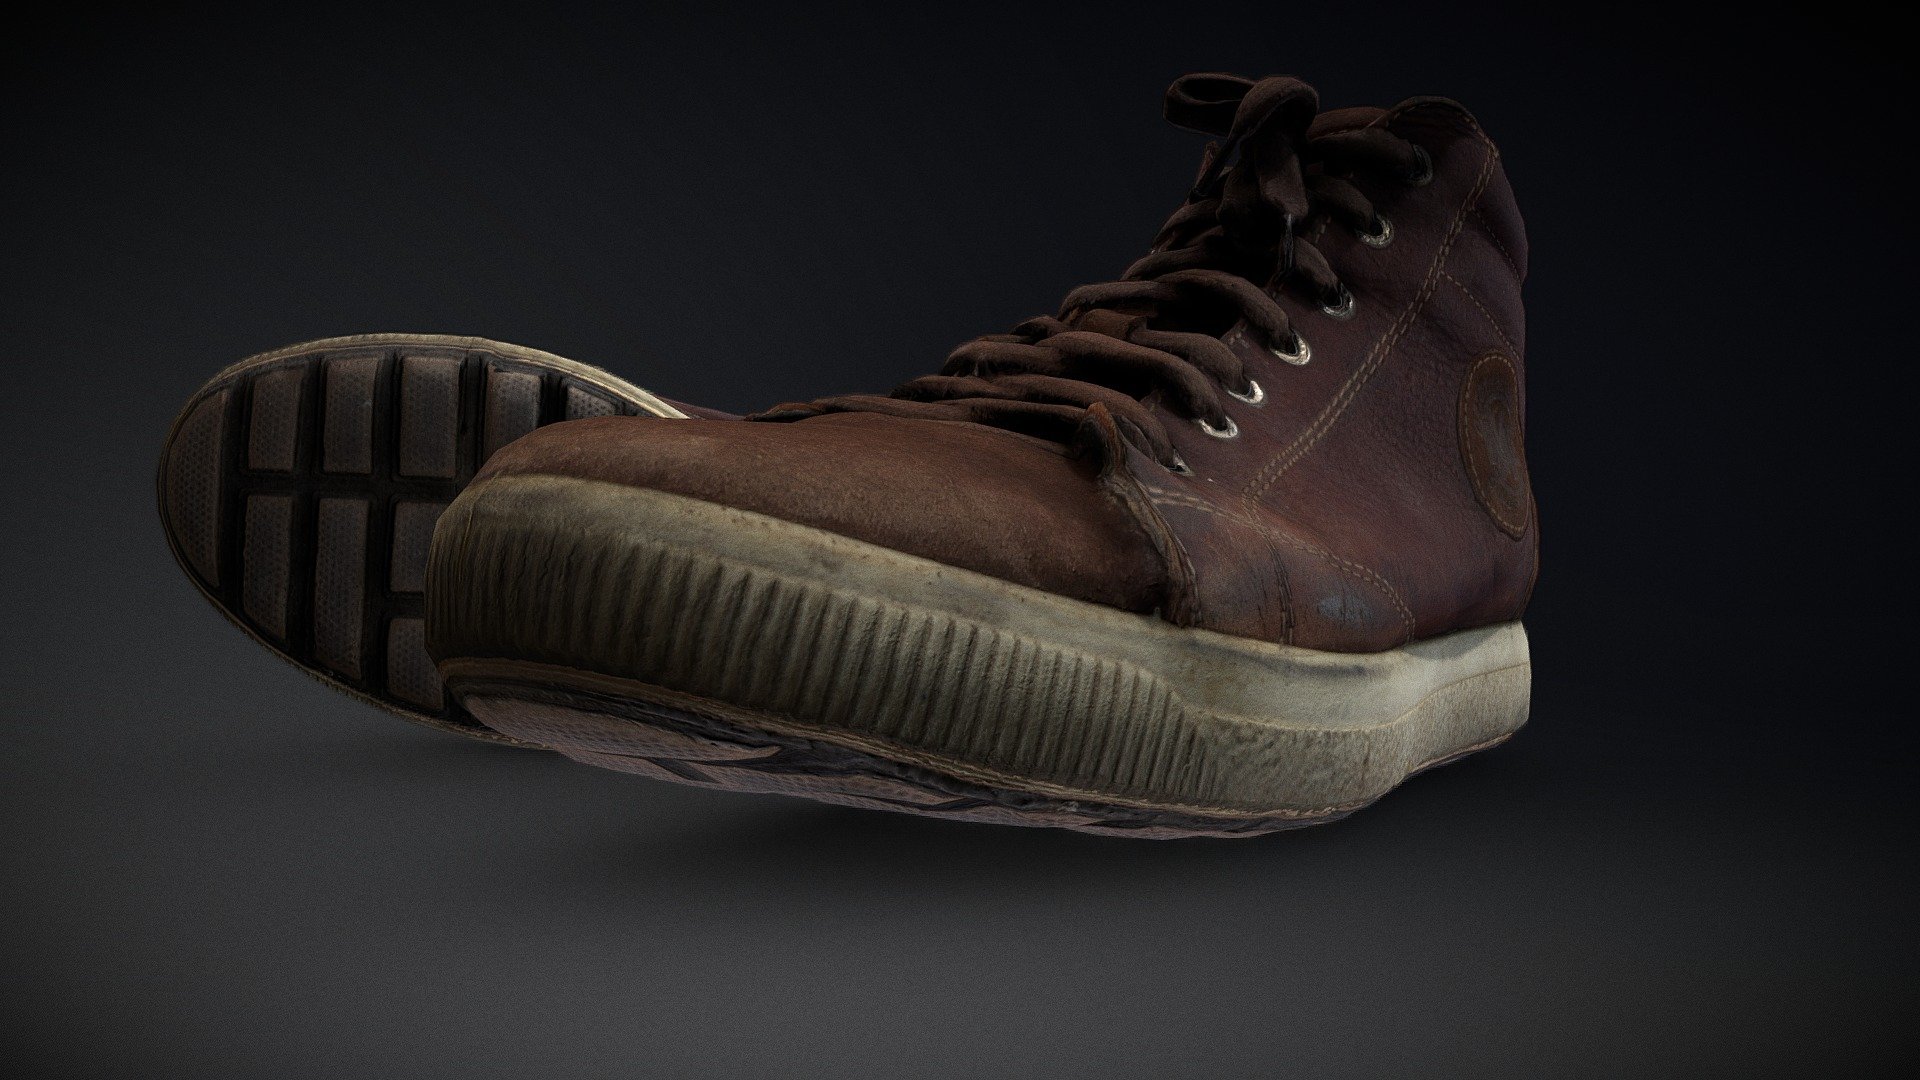 3d Artist: Denis Yakimuk
Boot, 3D scanned with a turntable, lots of polarized lights, and a single Canon 700D (140 photos). 
Cleanup and retopology to quads in 3DCoat. PBR workflow in 3DCoat to create specularity, roughness, and metal maps 3d model